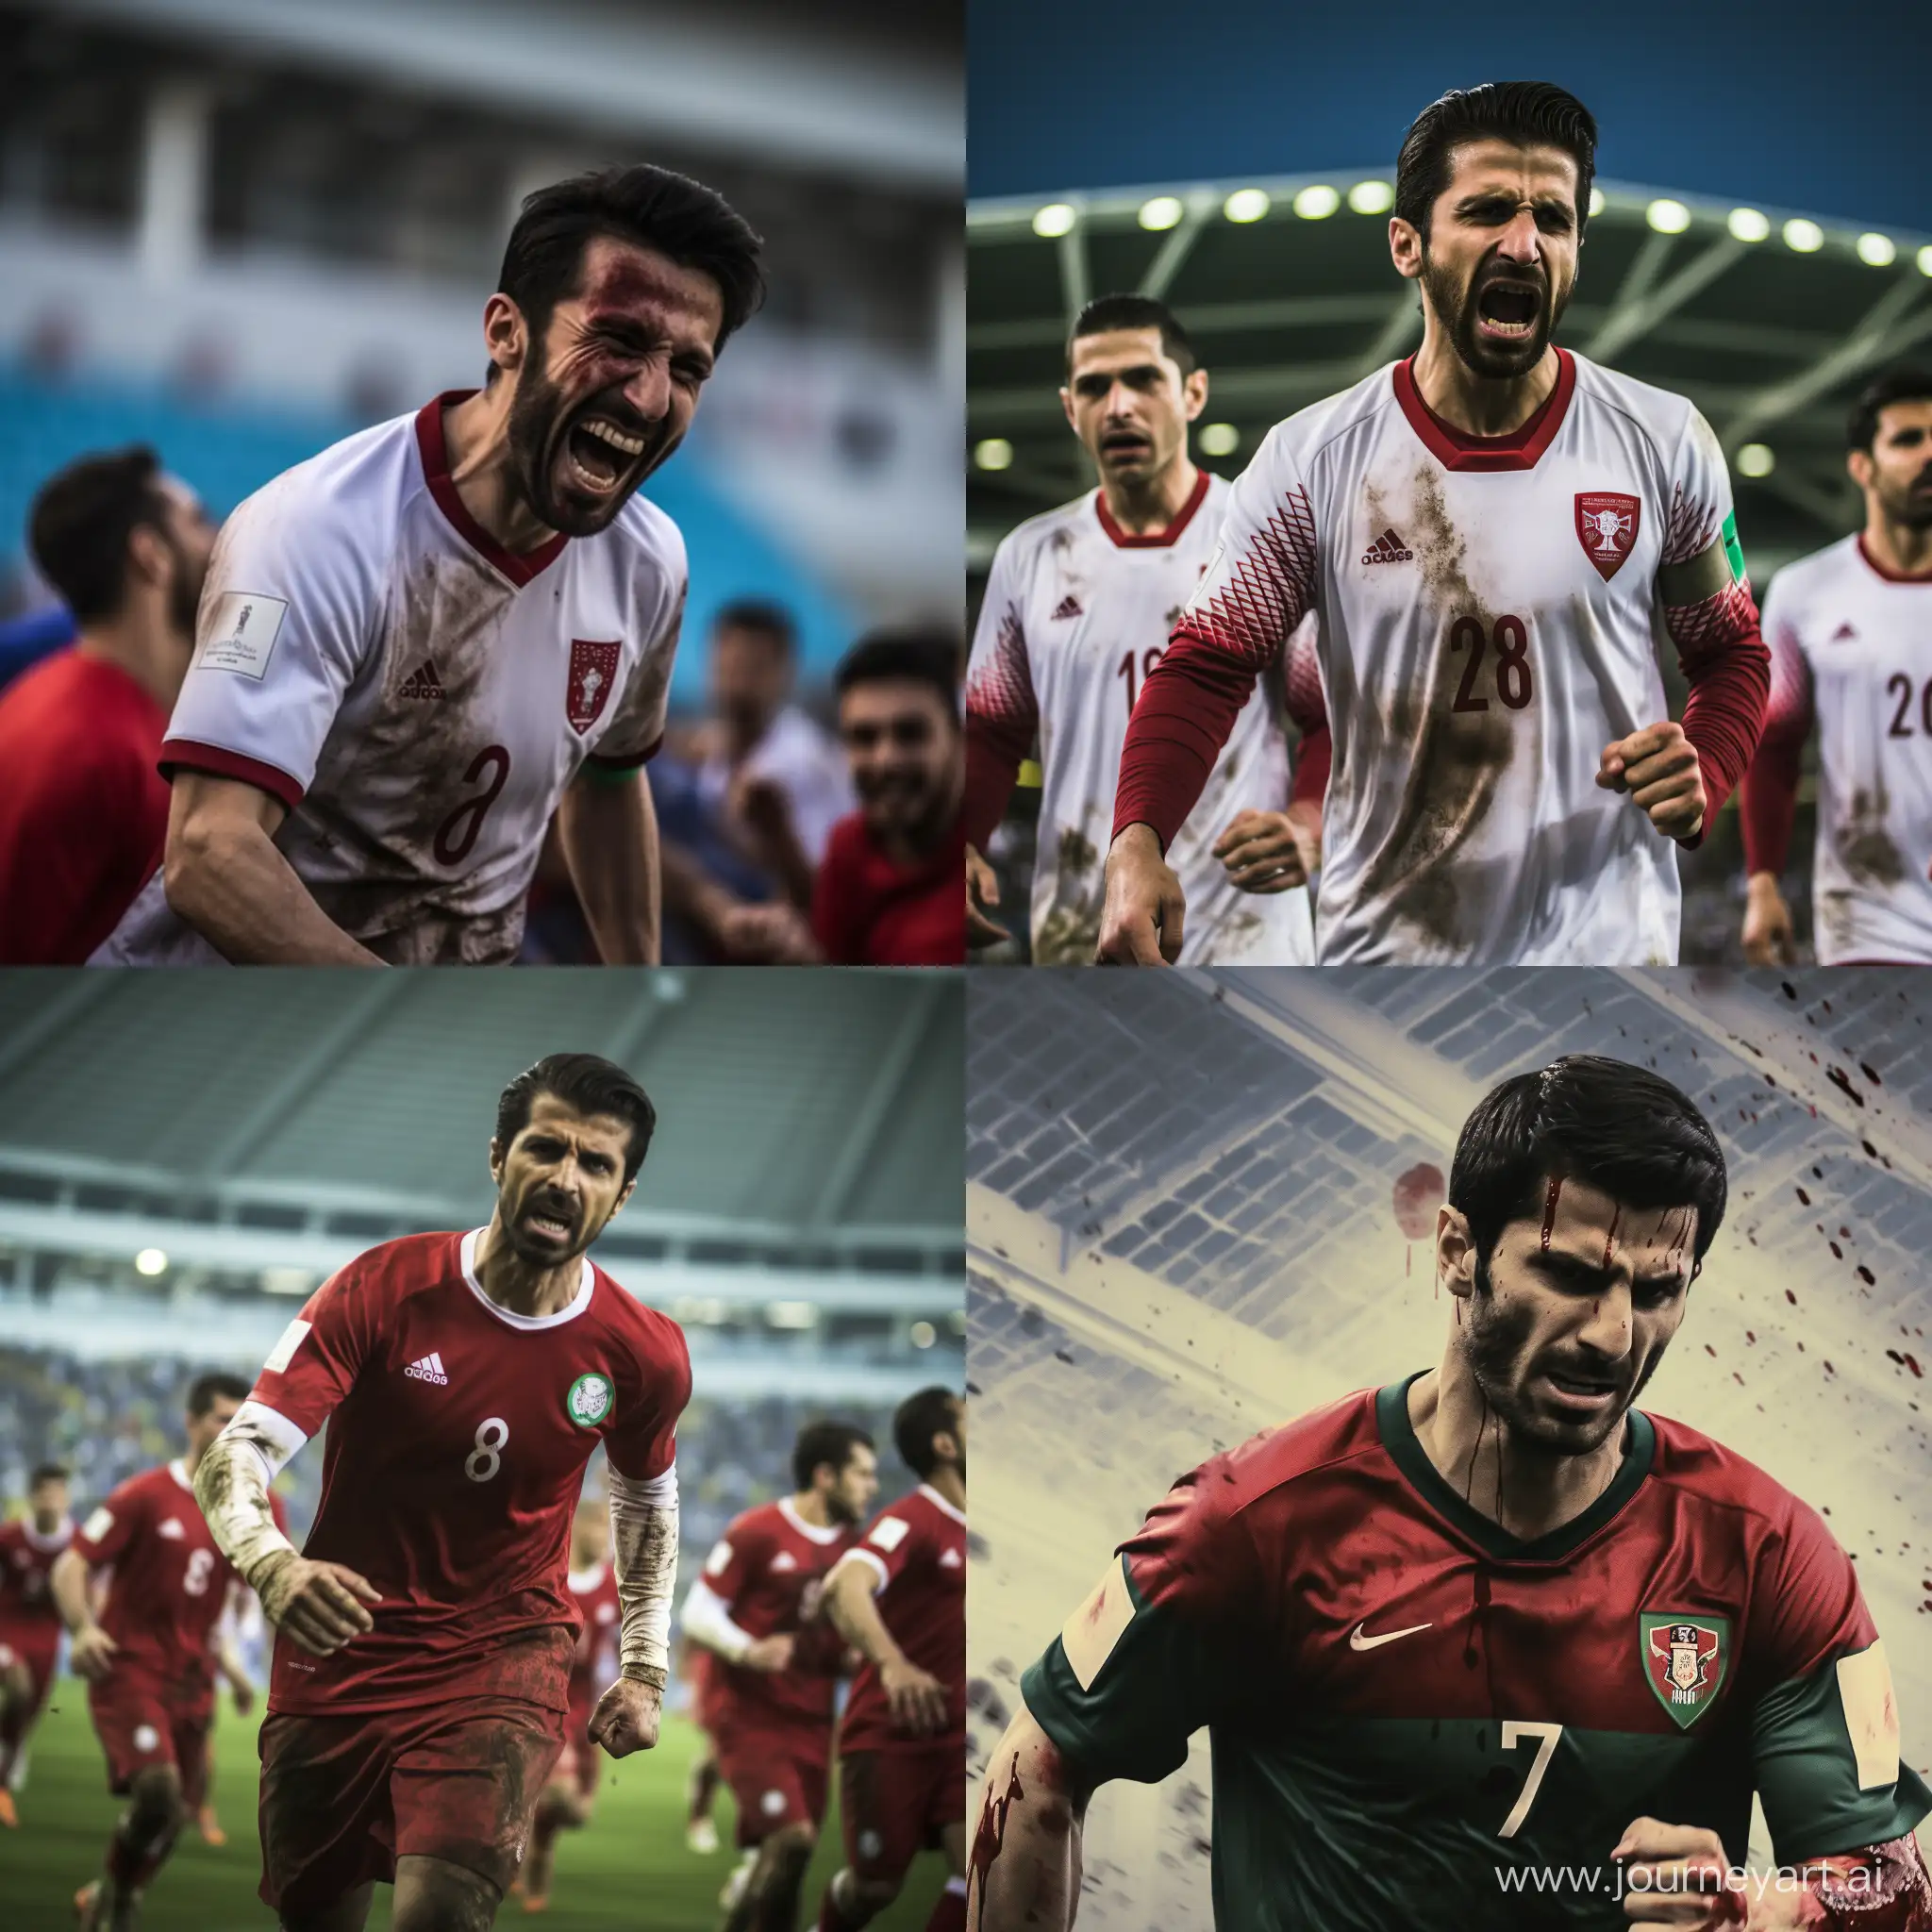  iran national soccer team playing in blood 